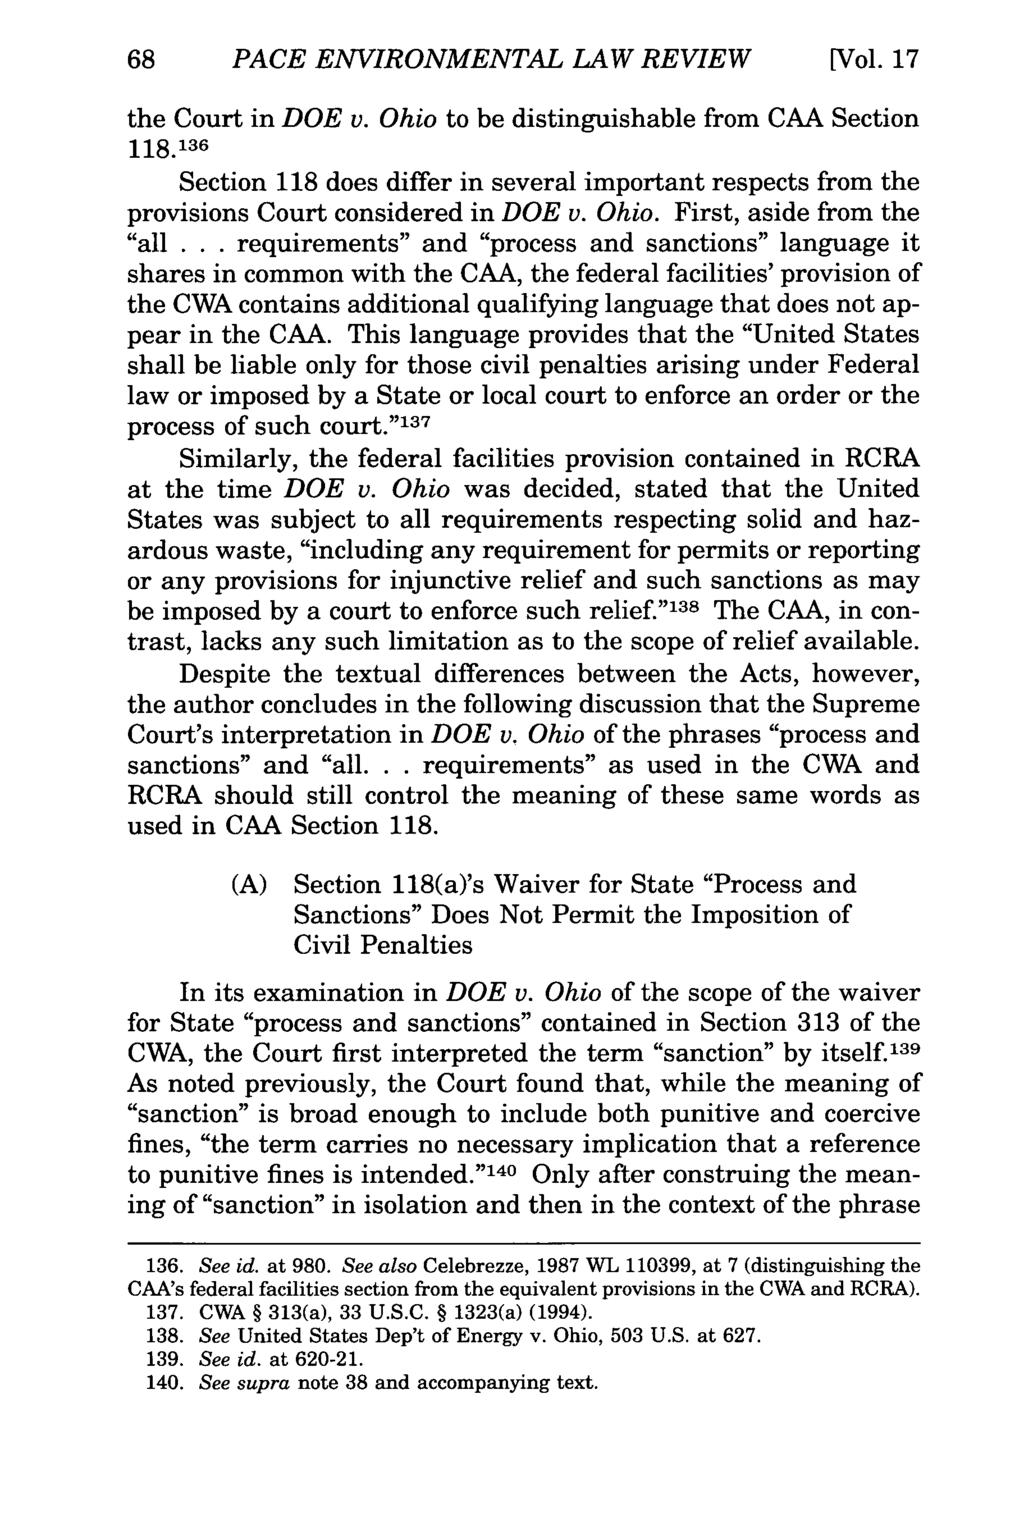 68 PACE ENVIRONMENTAL LAW REVIEW [Vol. 17 the Court in DOE v. Ohio to be distinguishable from CAA Section 118.